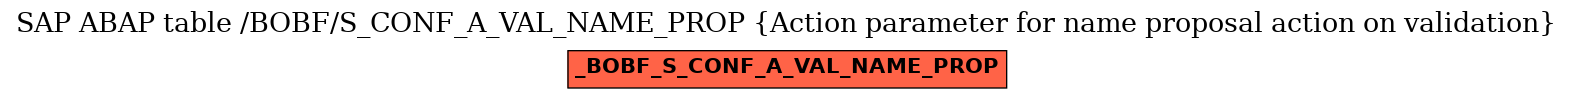 E-R Diagram for table /BOBF/S_CONF_A_VAL_NAME_PROP (Action parameter for name proposal action on validation)